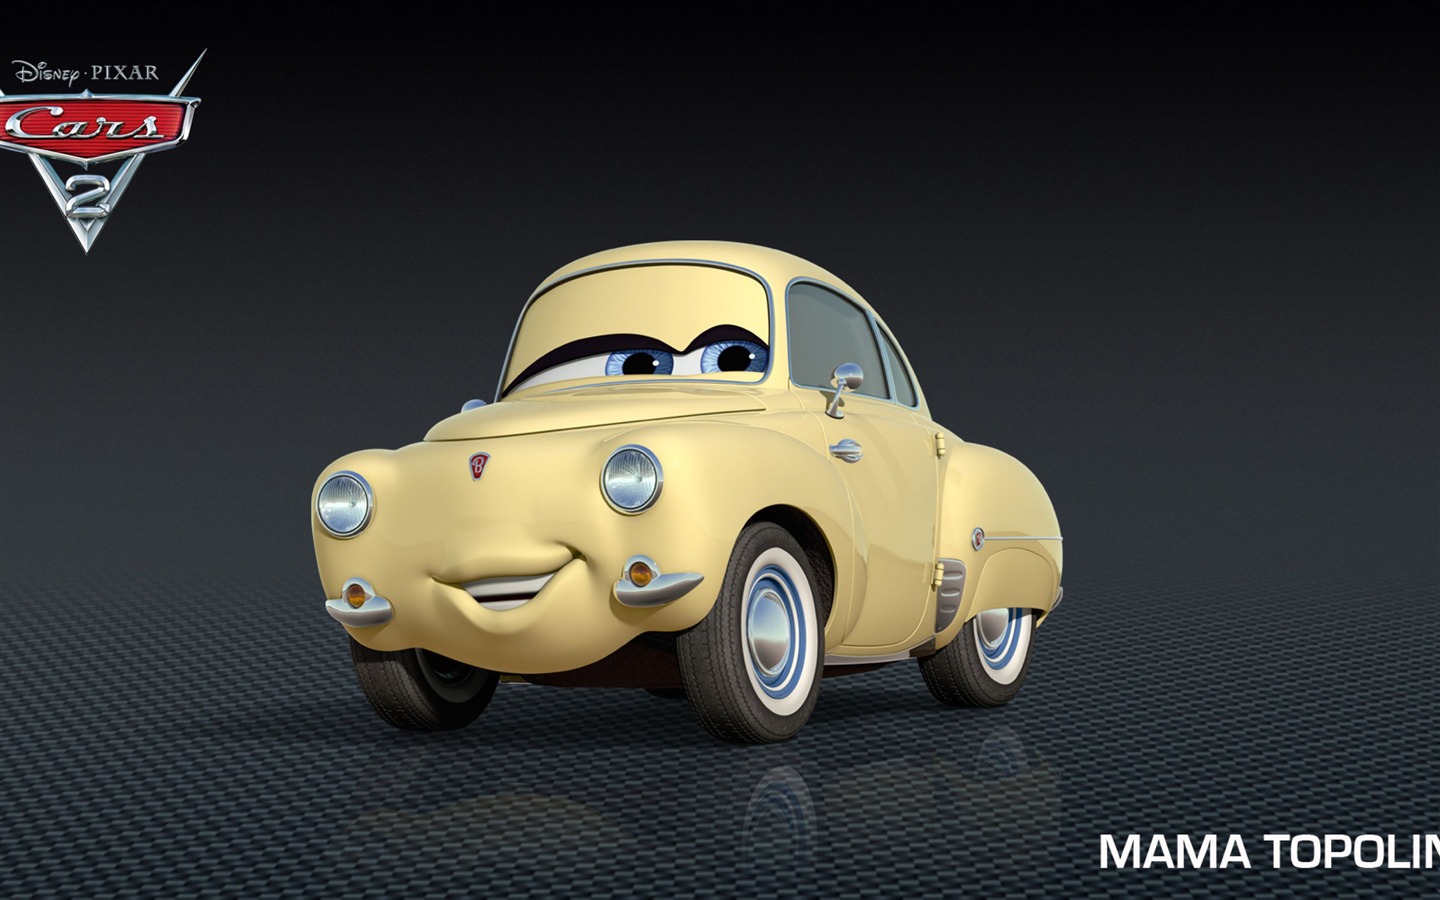 Cars 2 wallpapers #27 - 1440x900